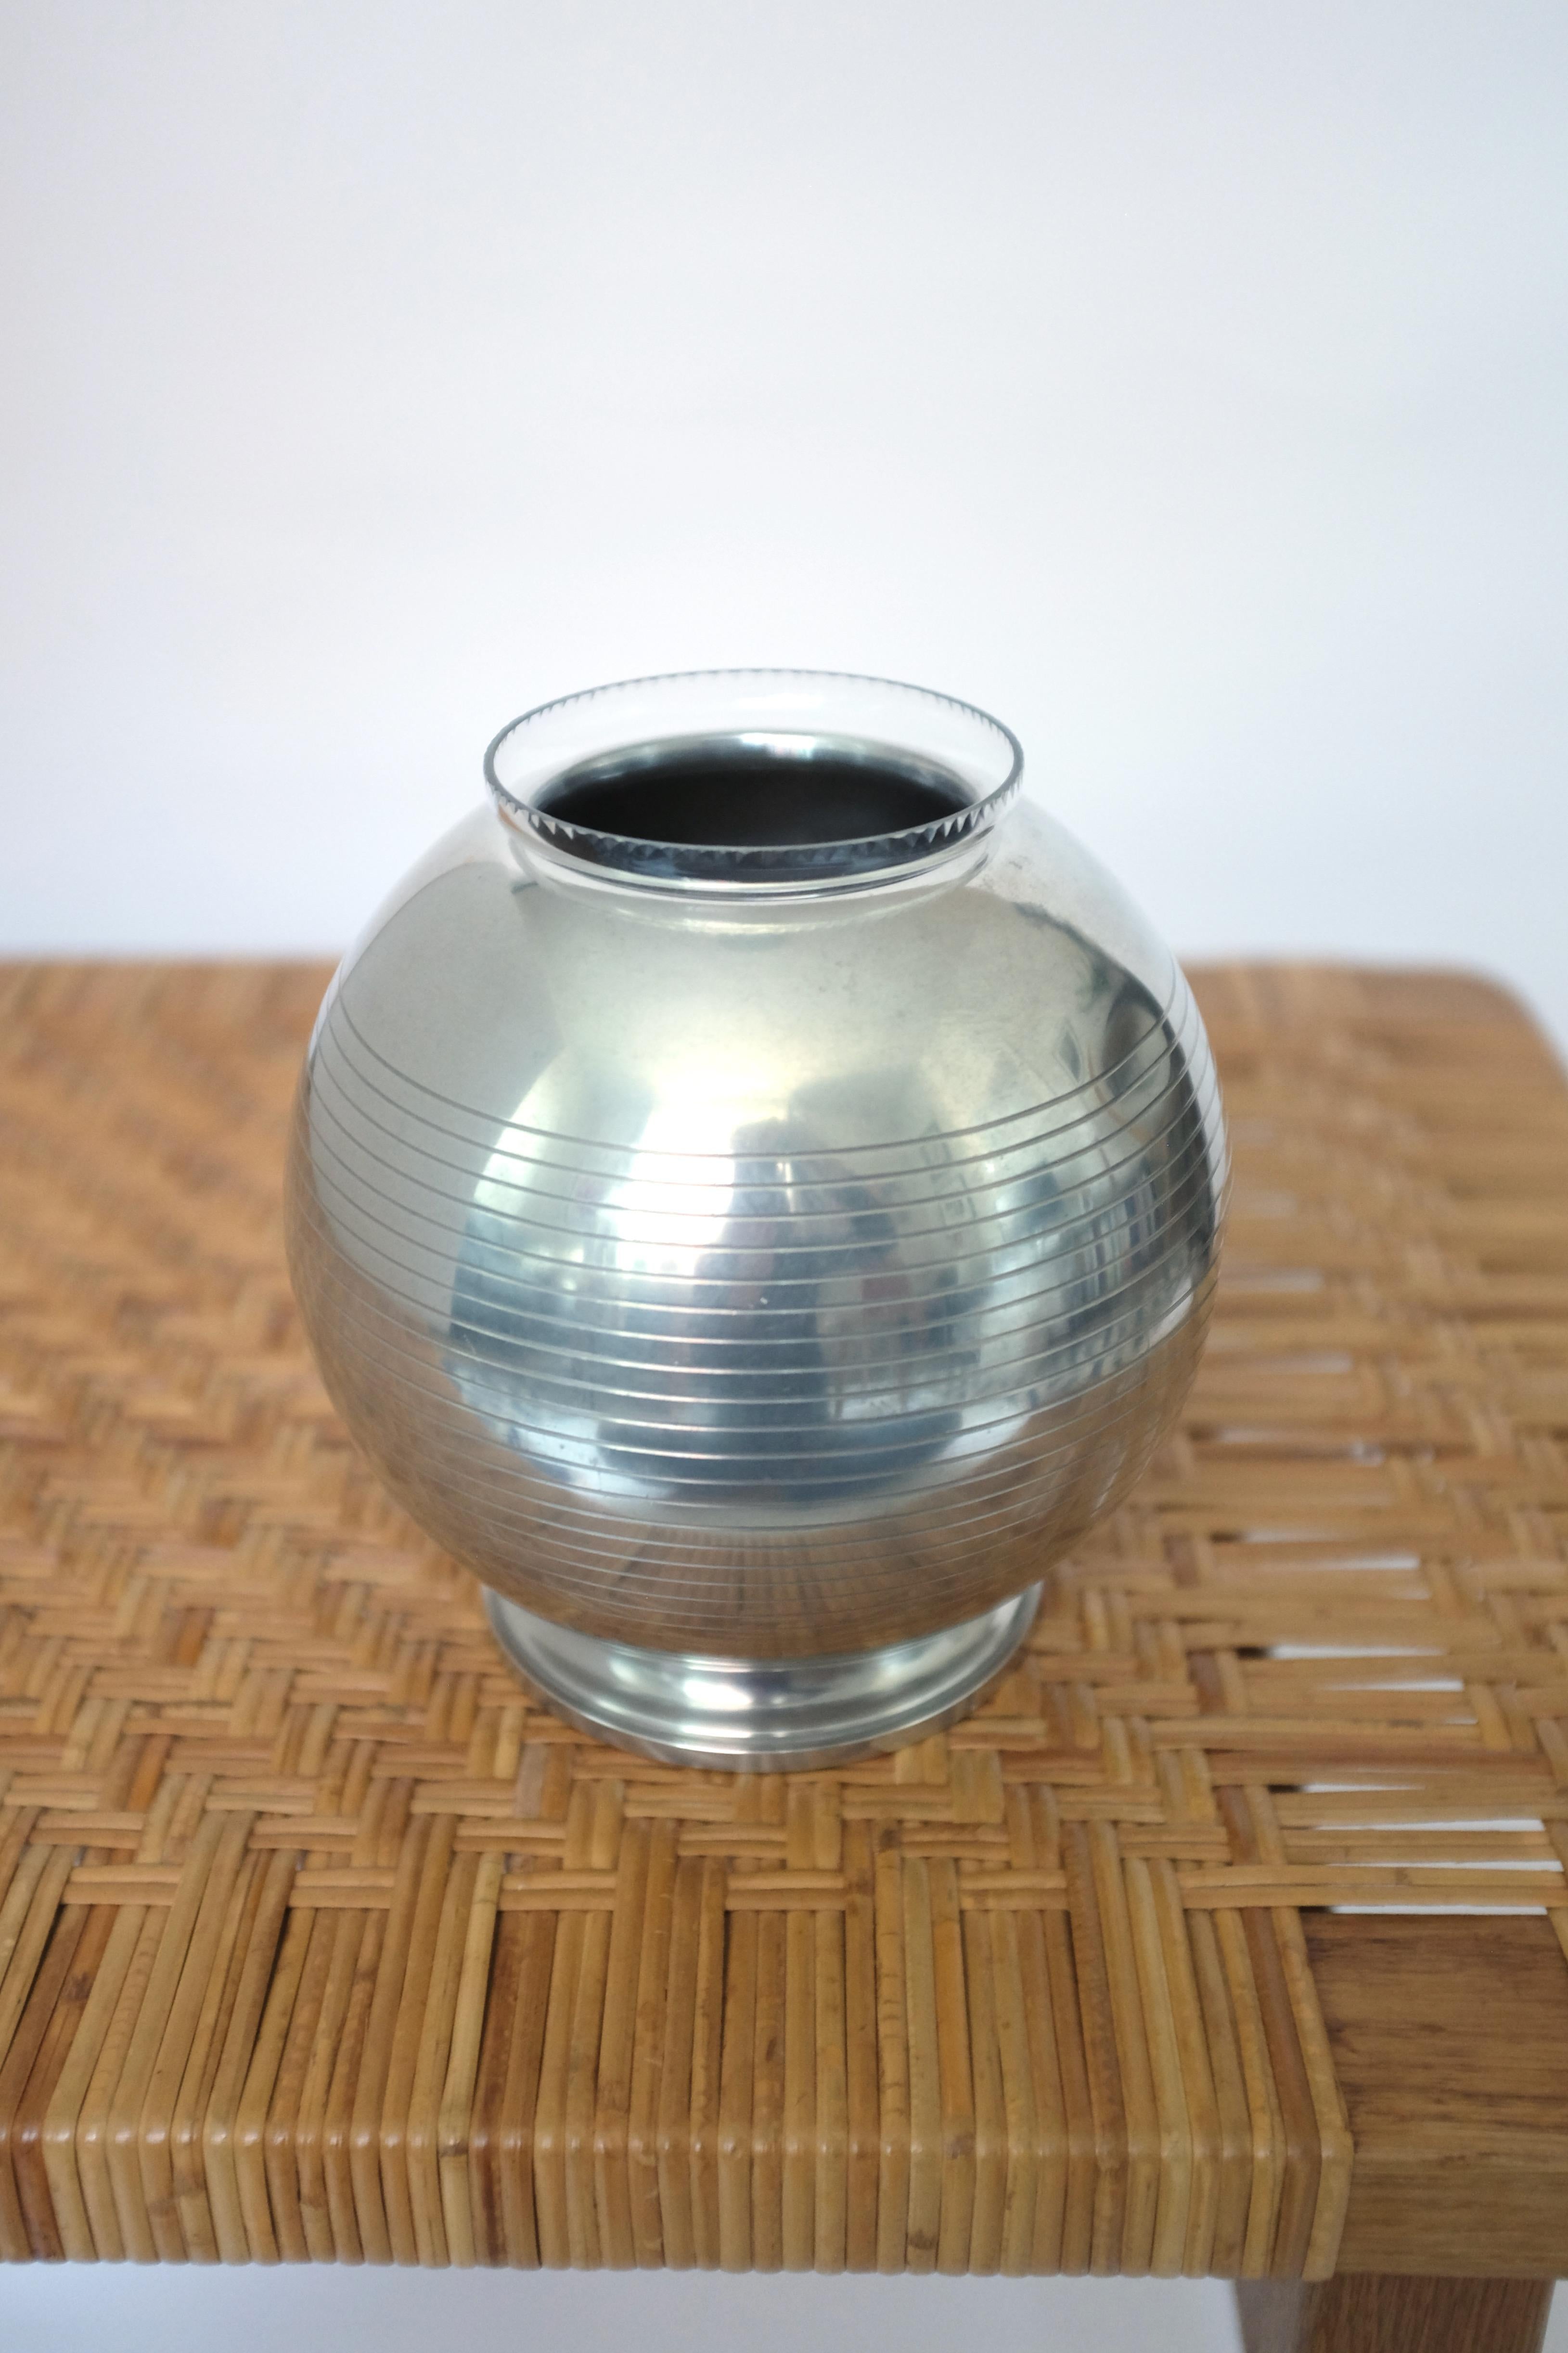 Beautiful round Pewter Vase from 1936 by GAB, Sweden. Very decorative with original glass inserter and carved horizontal lines across the vase. In a good vintage condition with age appropriate wear and dents (please see photos). GAB was a Swedish